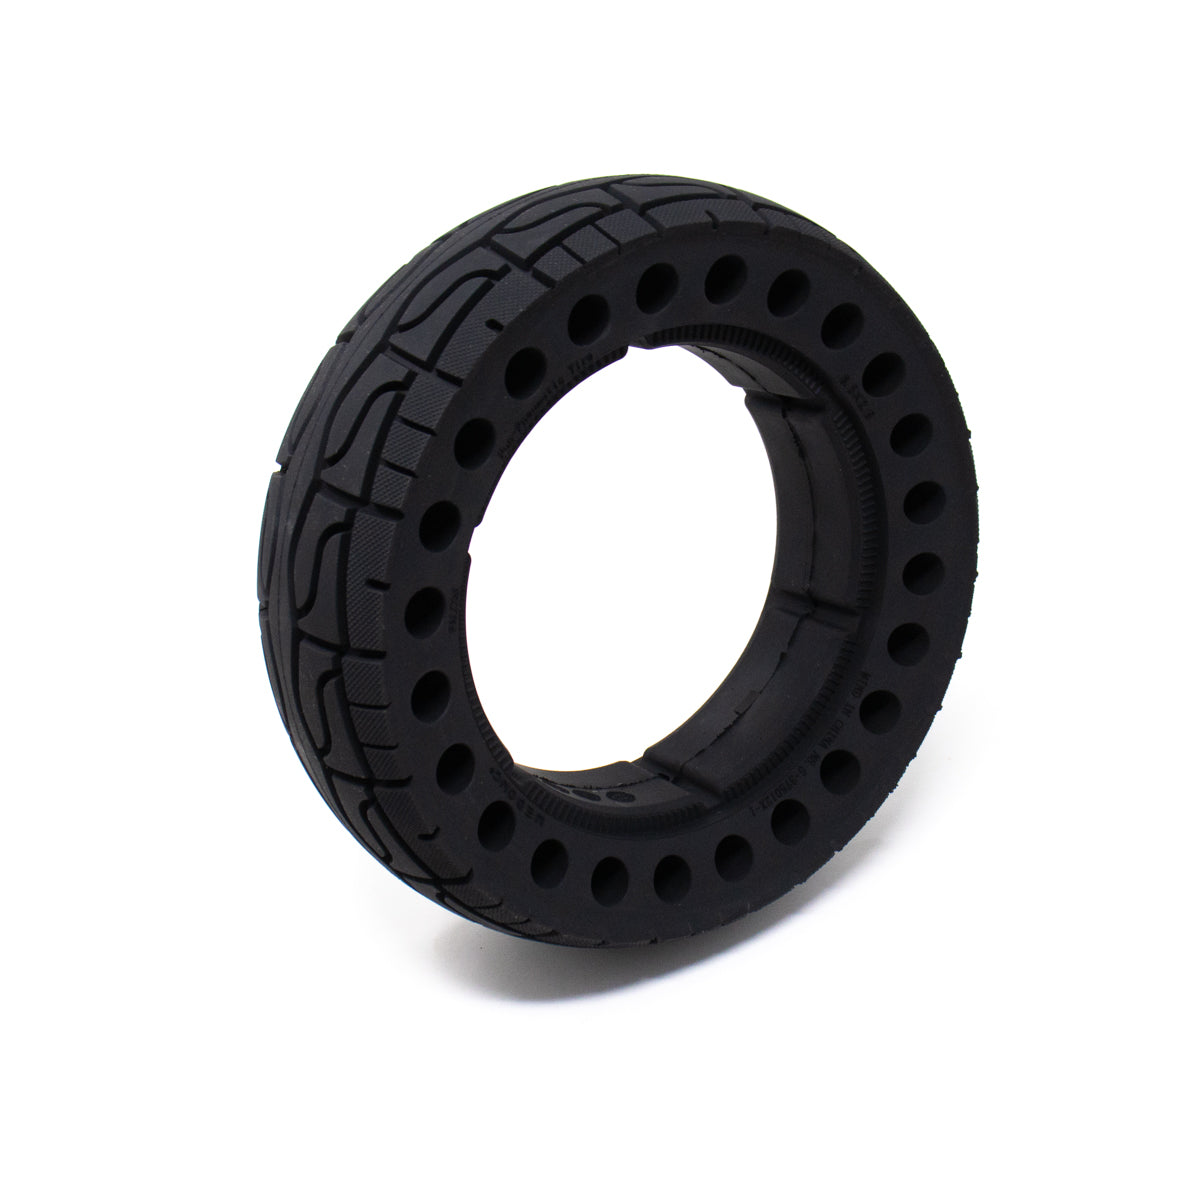 8.5x2.5" Solid Tire for VSETT 9+ Electric Scooters